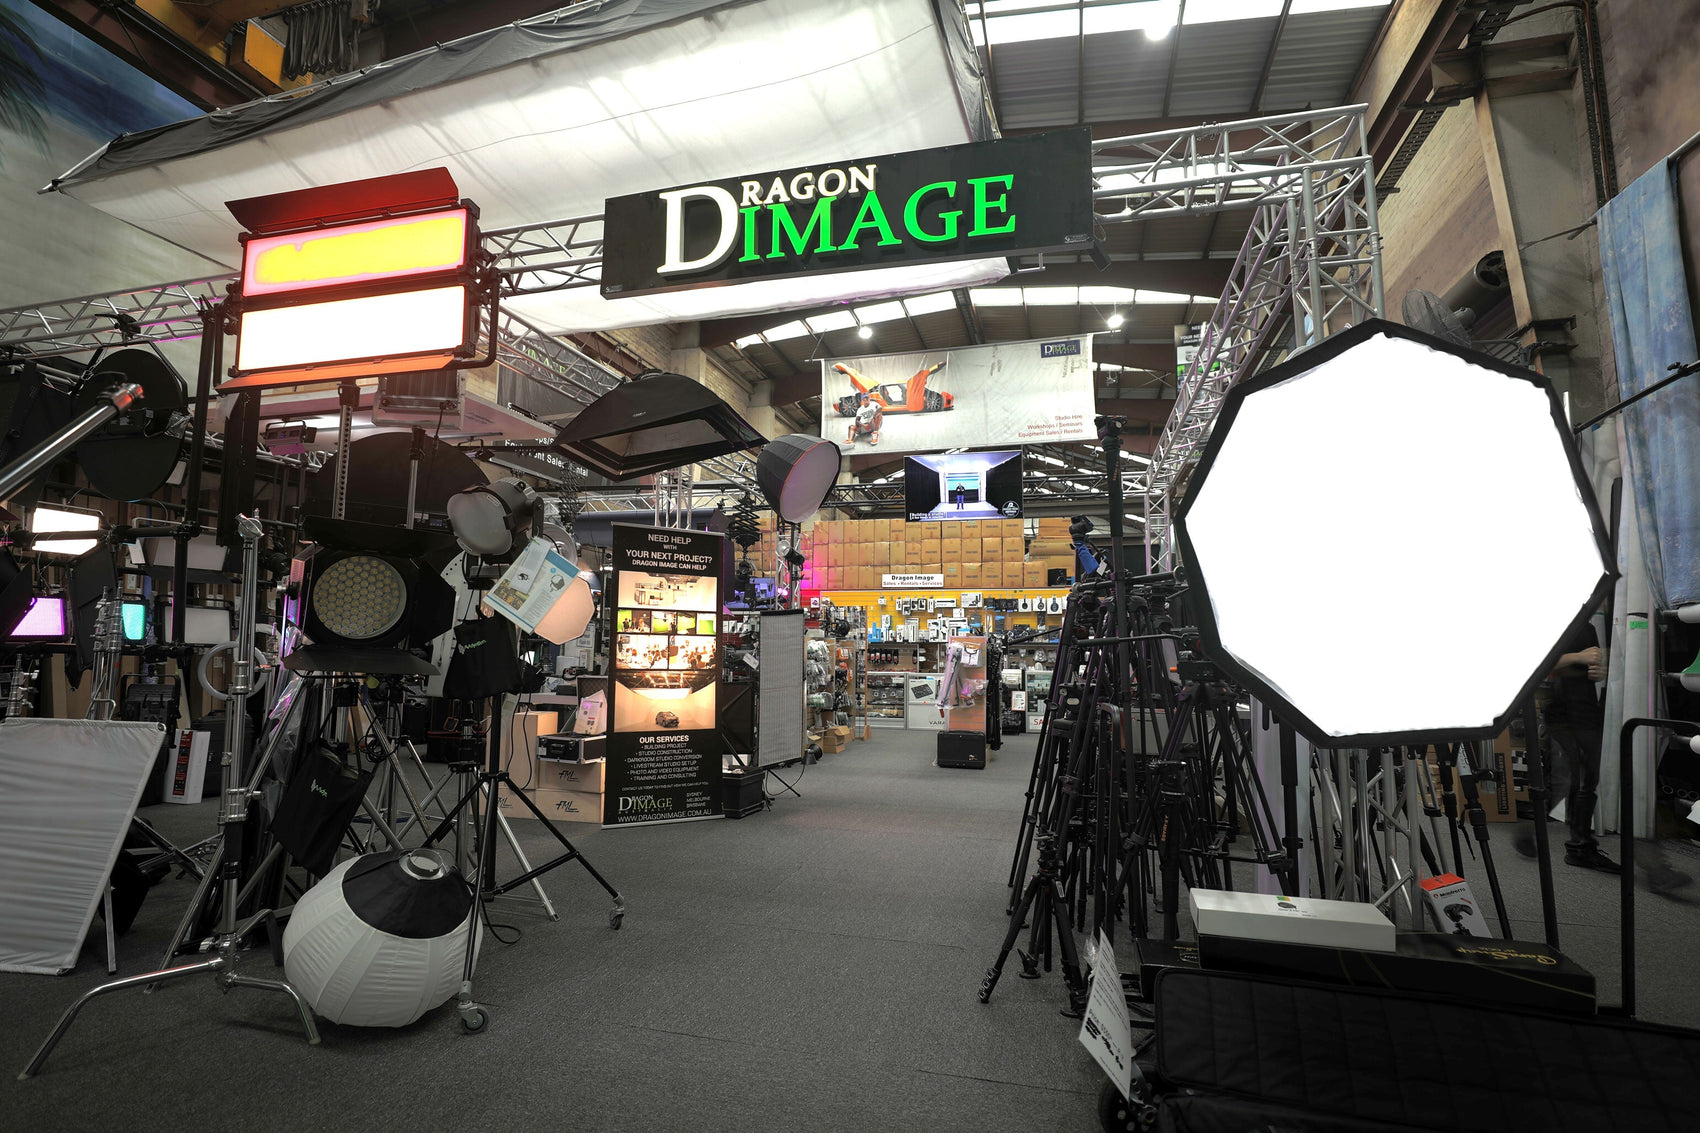 Brisbane - Sales Person Wanted for Photo, Video and Content Creation Equipment